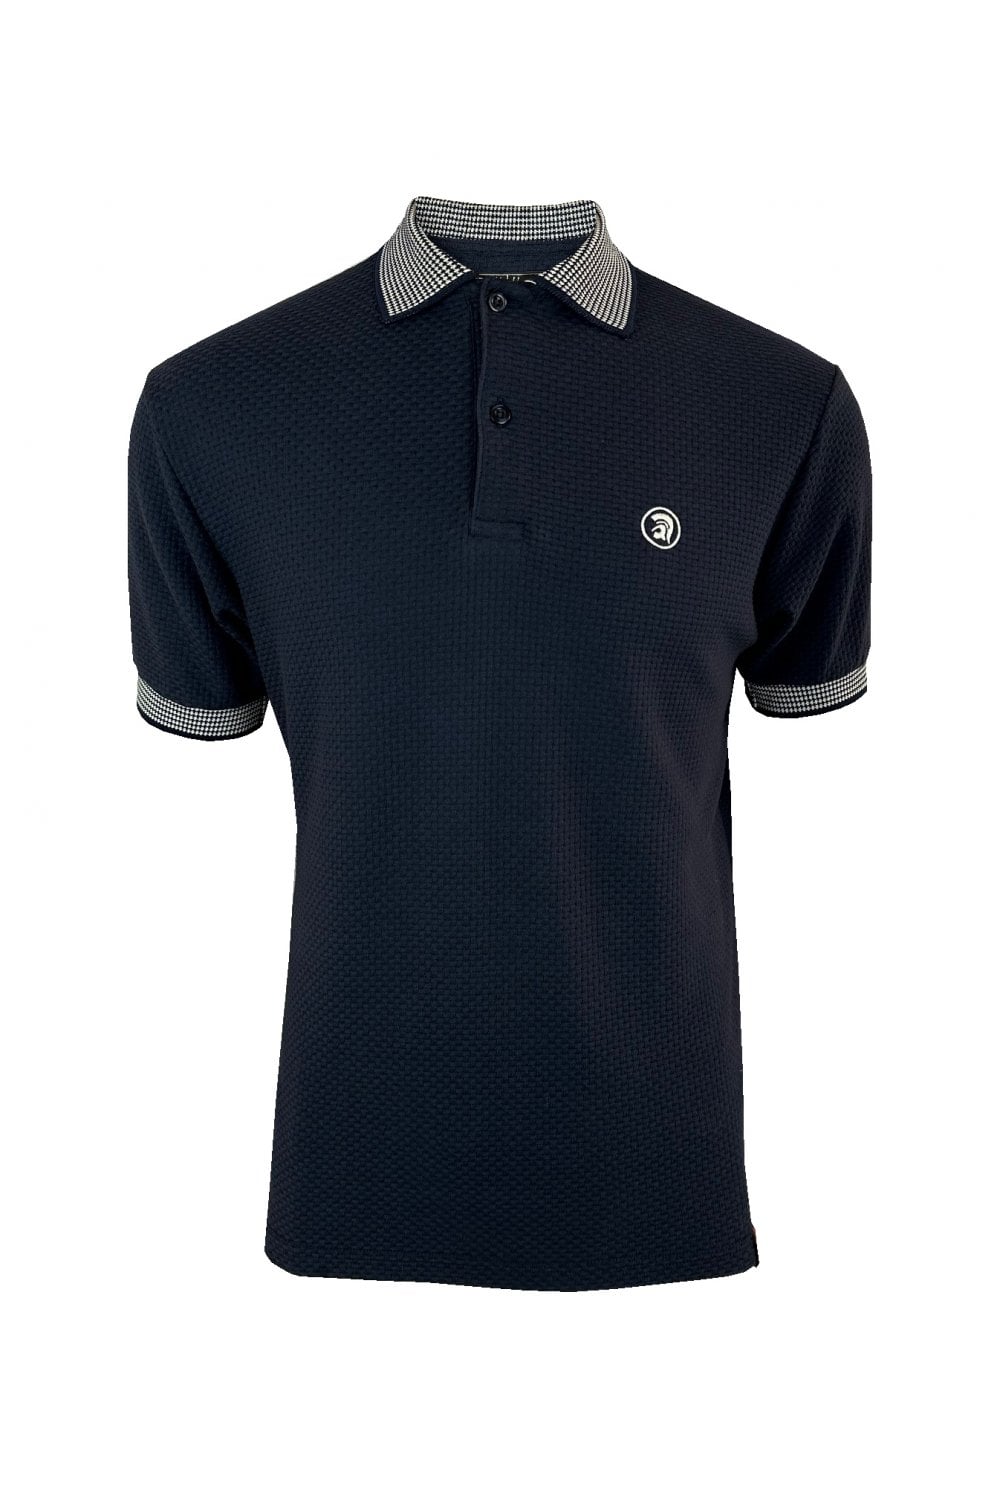 TROJAN Basket Weave Polo with jacquard collar and cuffs TR/8870 Navy - Raw Menswear